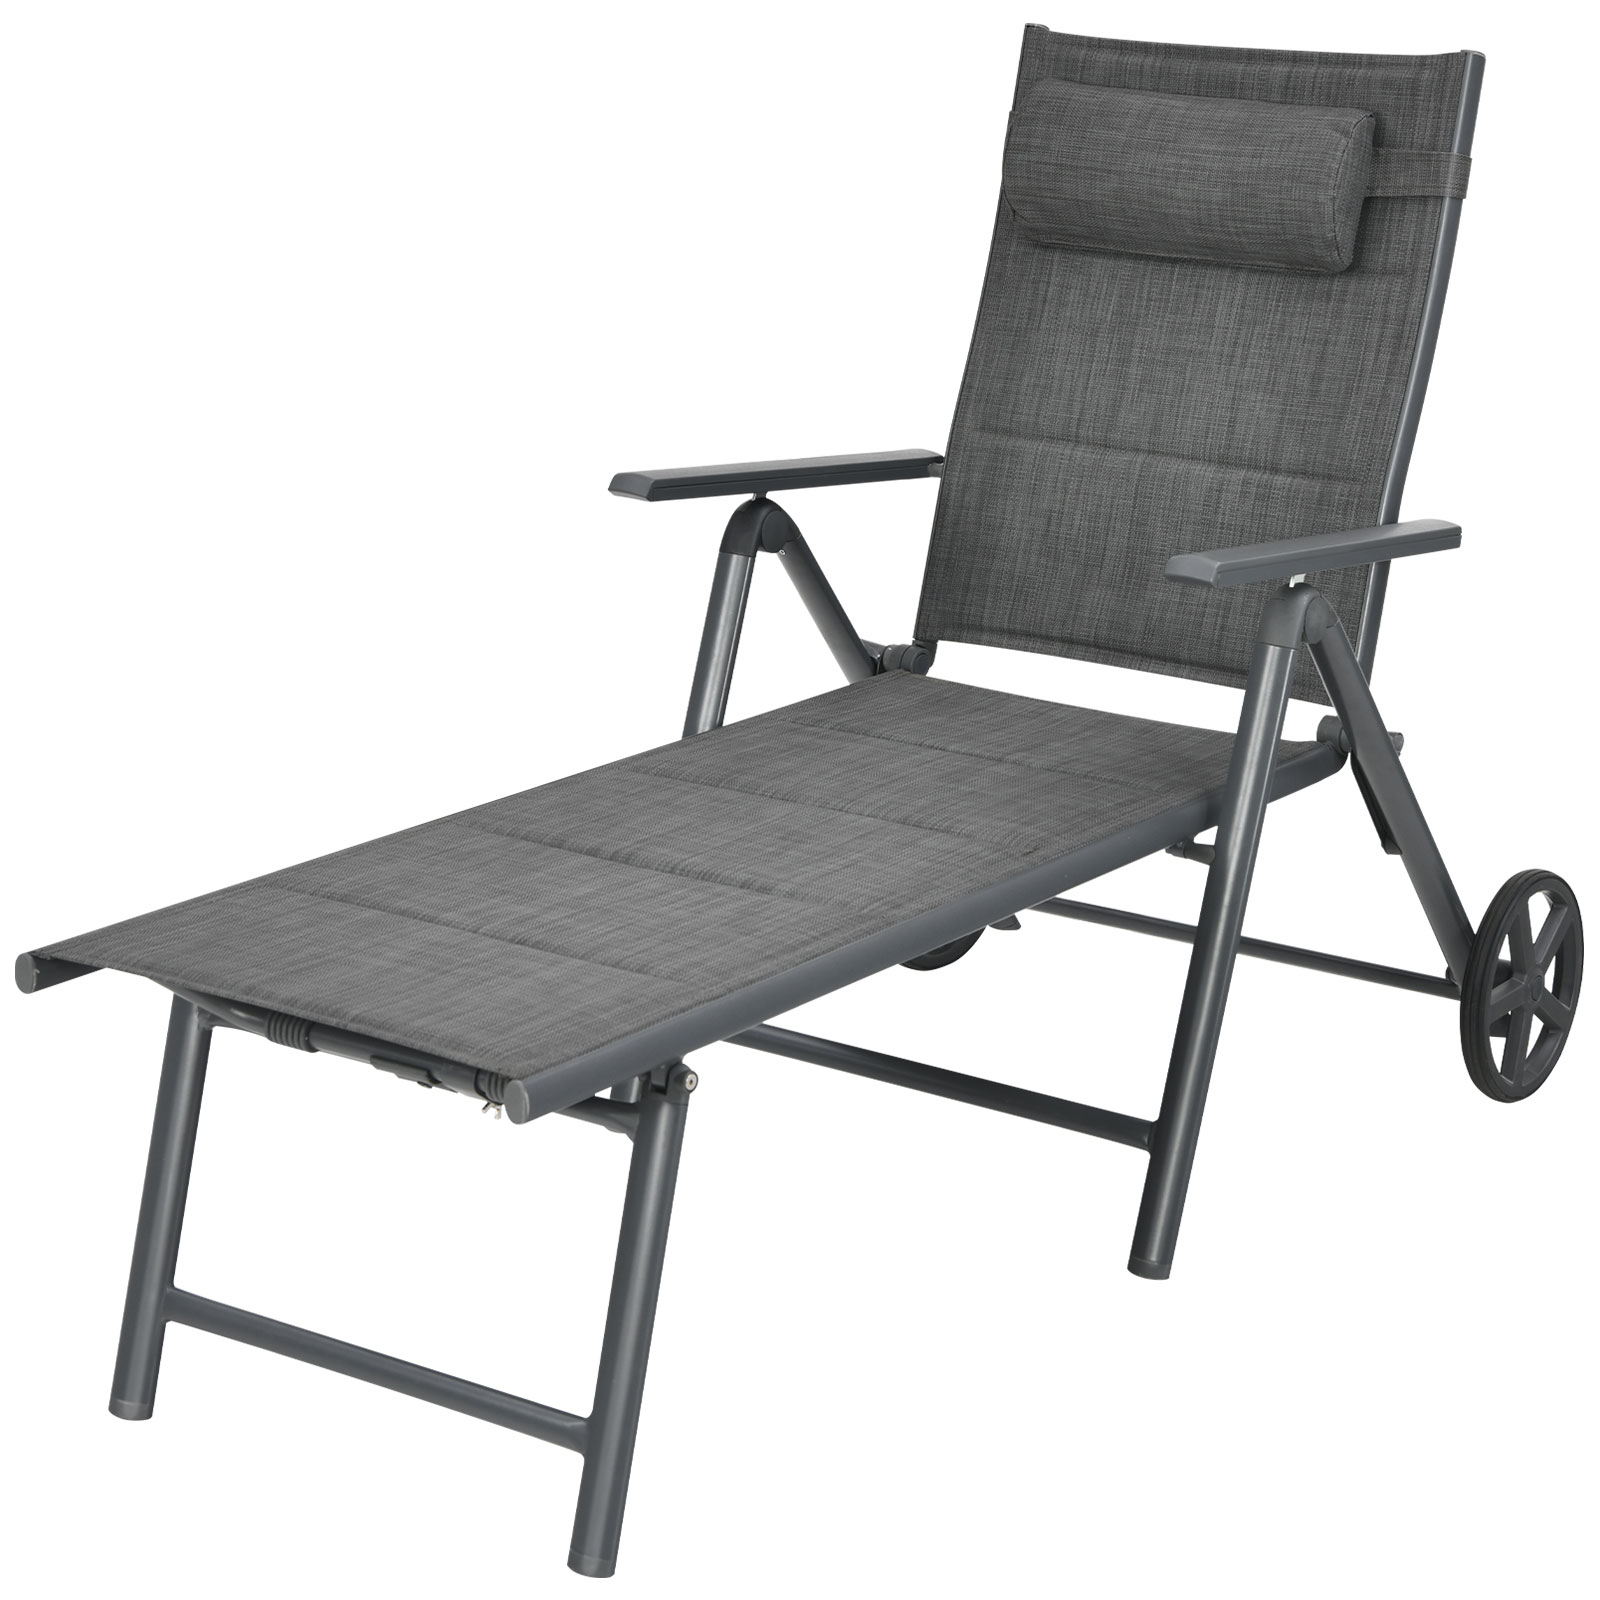 Topbuy Patiojoy Patio Chaise Lounge Chair Outdoor Reclining Chair w/Neck Pillow & Wheels Gray